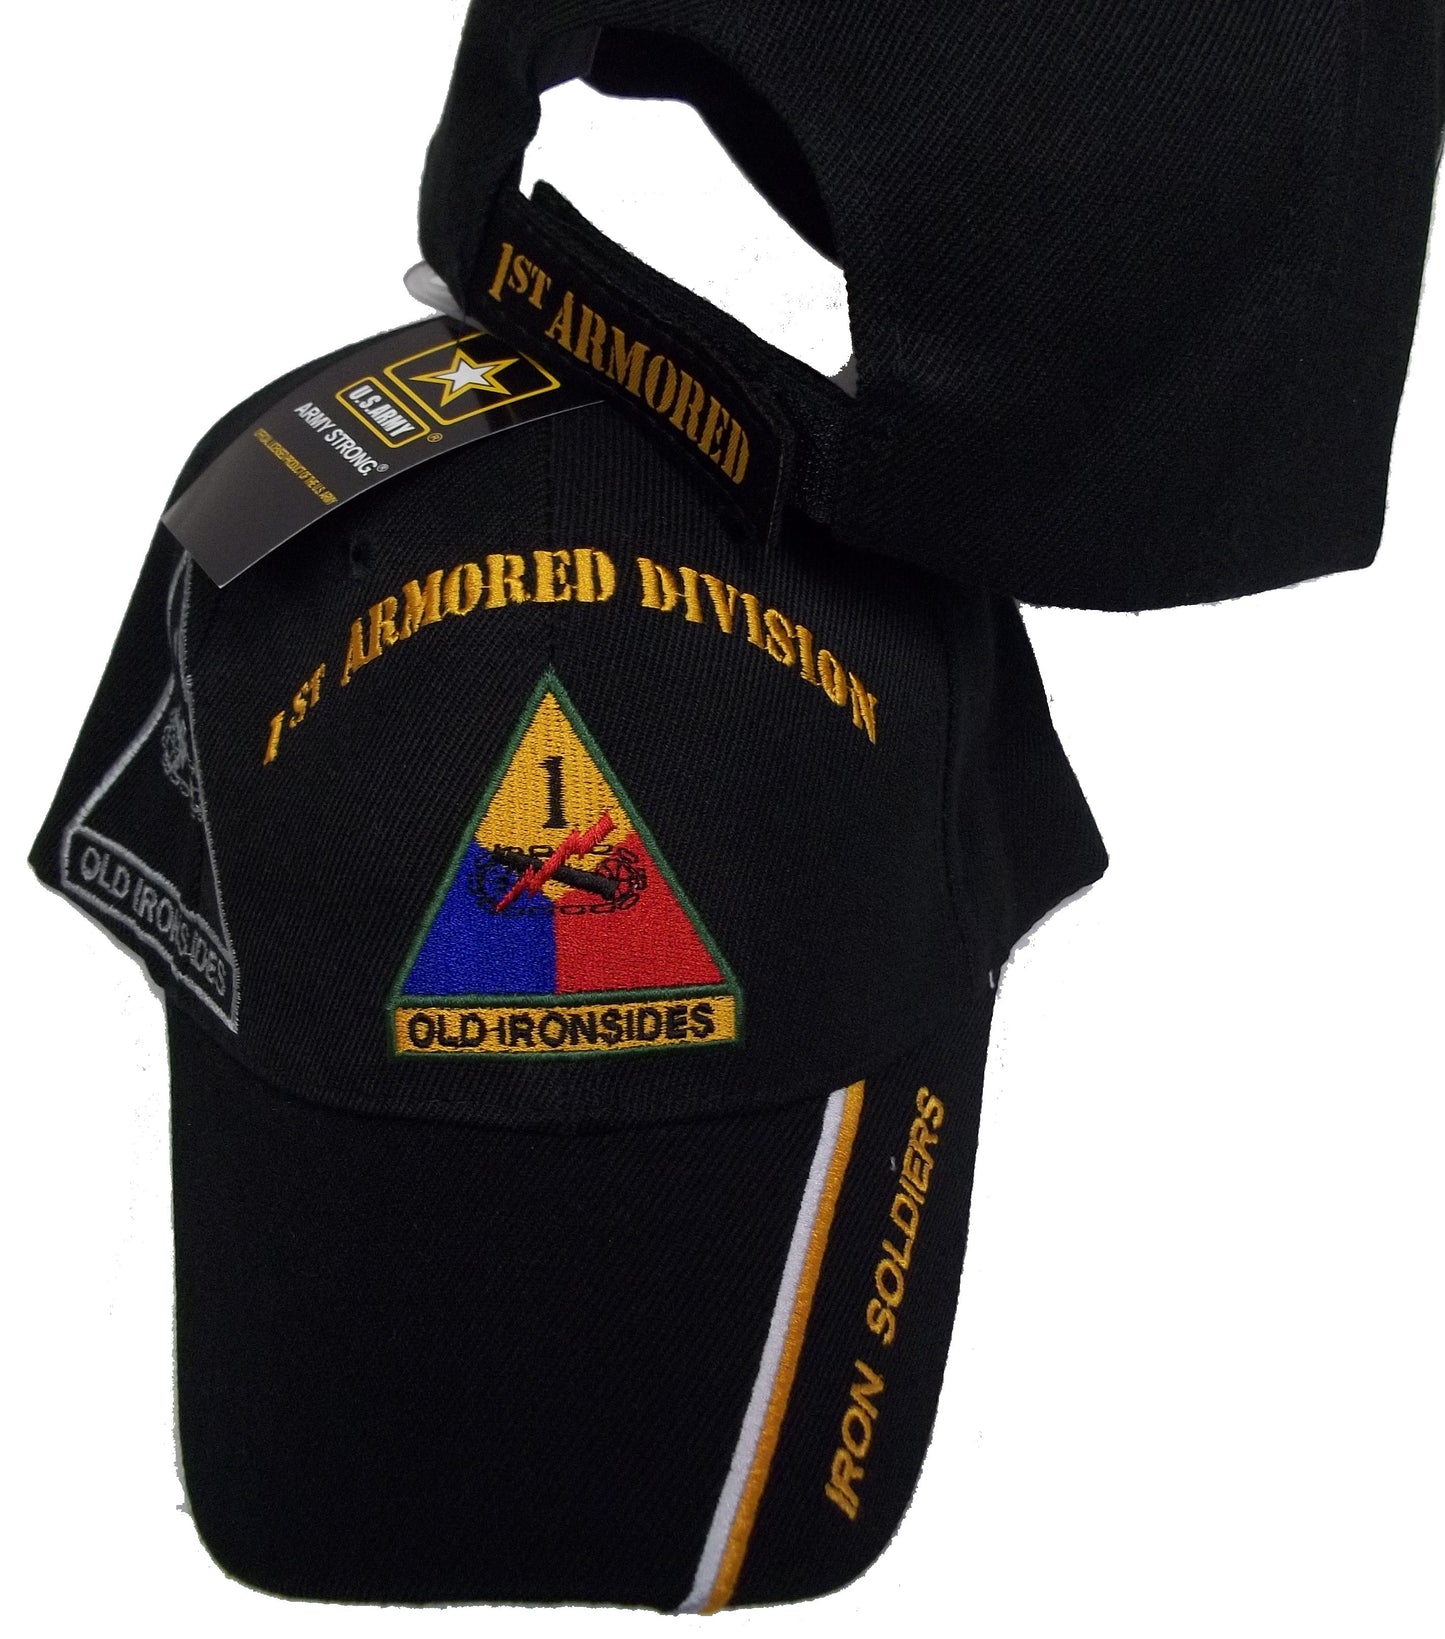 1st ARMORED DIVISION OLD IRONSIDES IRON SOLDIERS BASEBALL STYLE EMBROIDERED HAT usa army cap